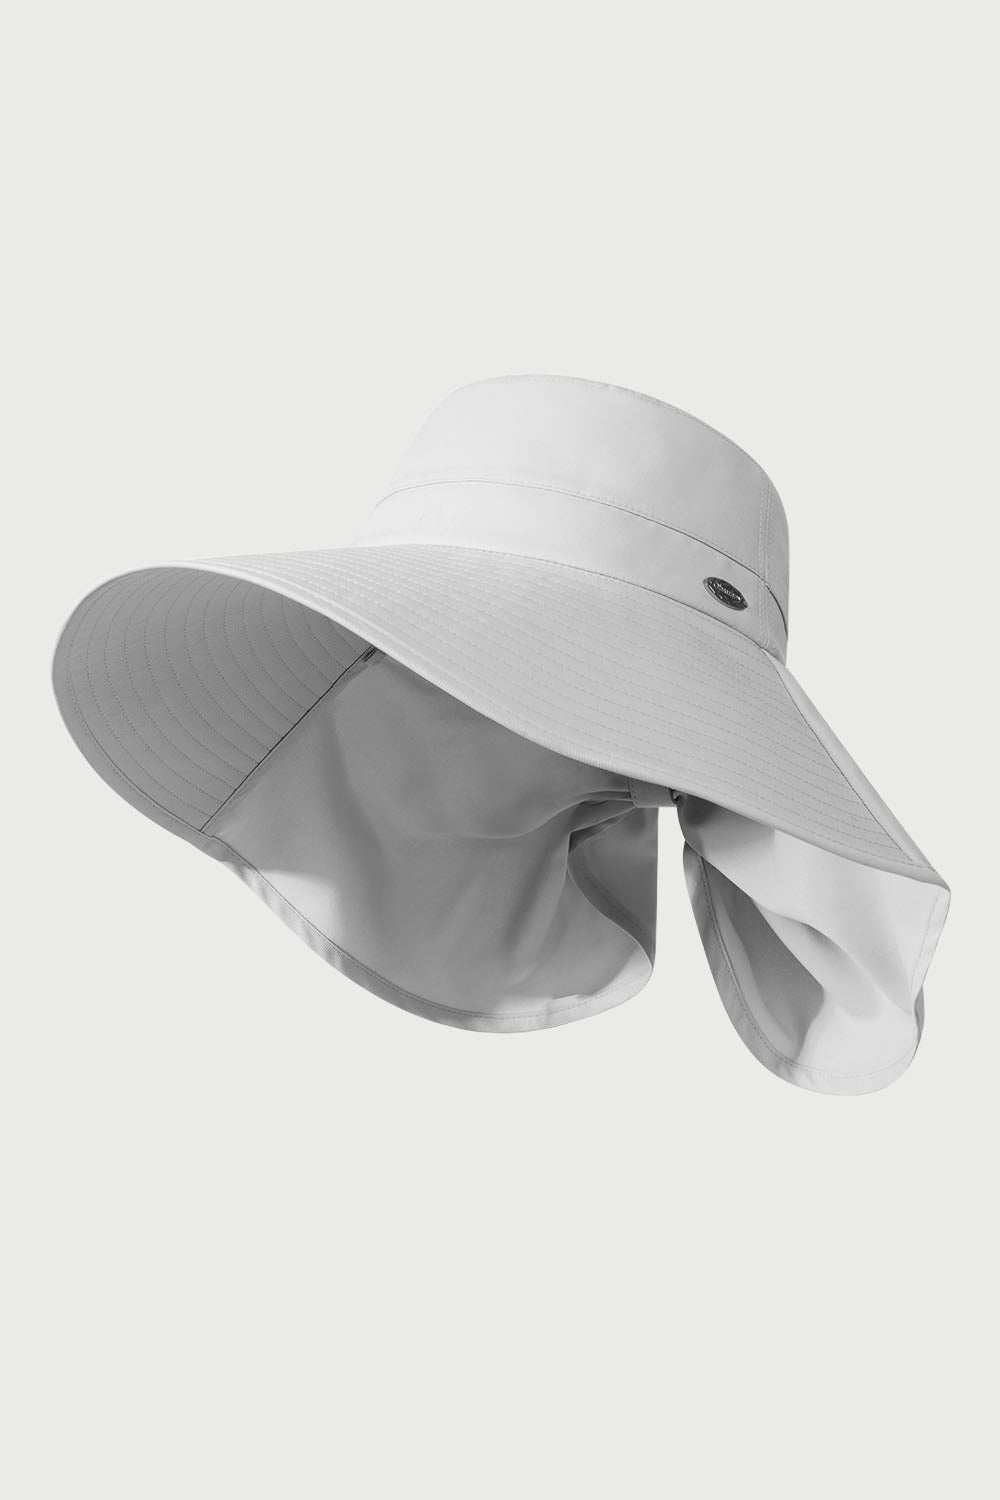 Oh Sunny Everyday Luxe Sun Hat UPF50+